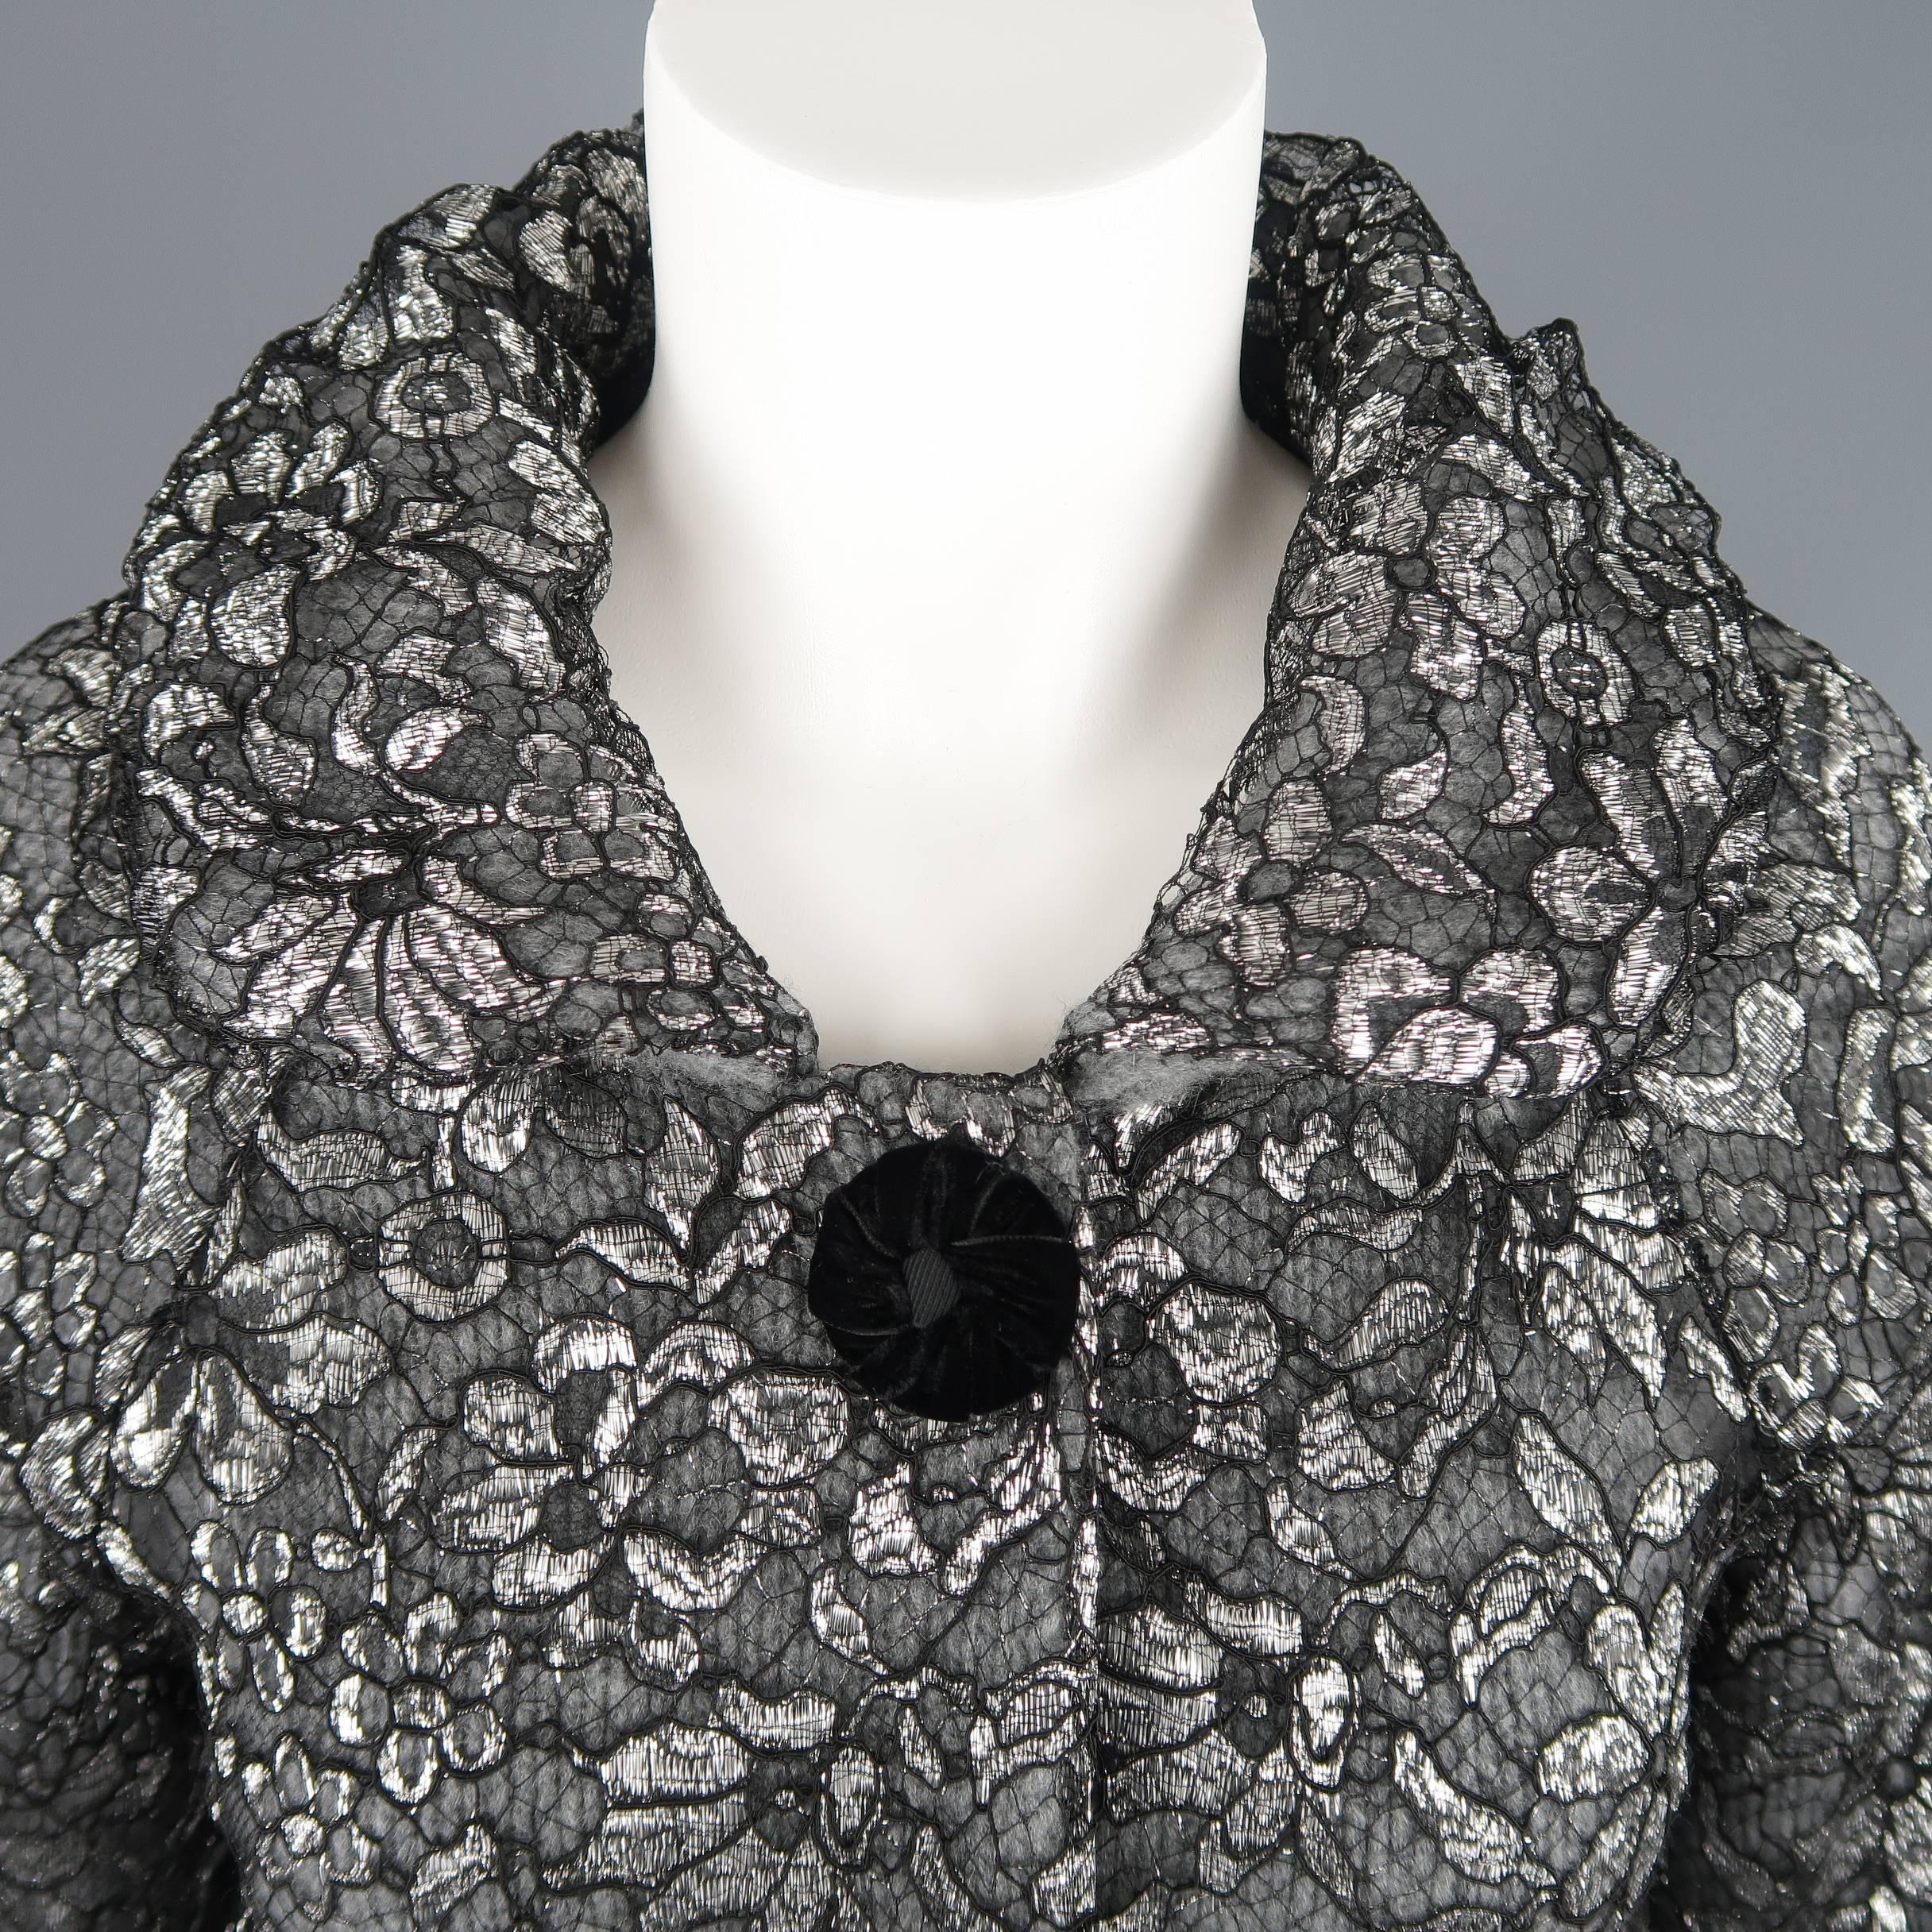 MARC JACOBS jacket comes in gray cashmere knit with a metallic silver lace overlay and features a round collar, retro silhouette, and three snap closure with black velvet buttons. Made in Italy.
 
Excellent Pre-Owned Condition.
Marked: S
